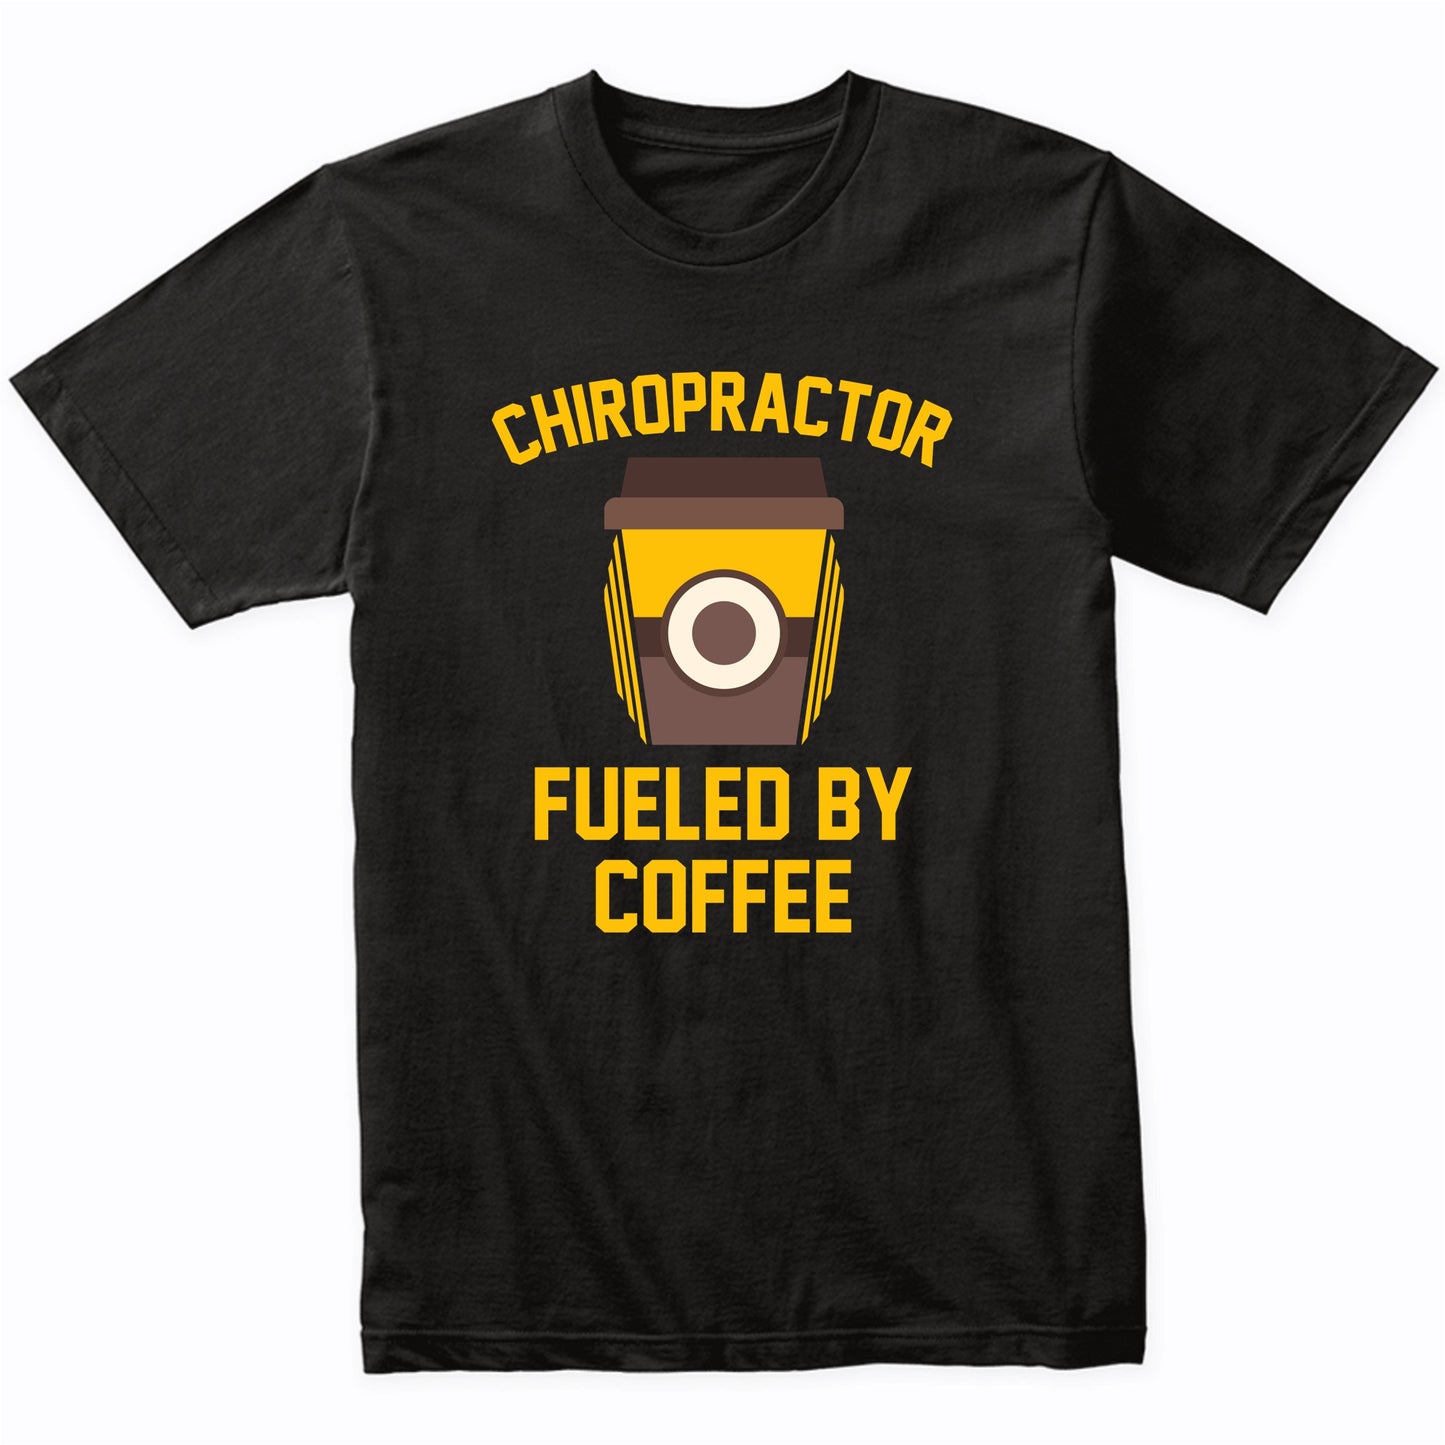 Chiropractor Fueled By Coffee Funny Shirt